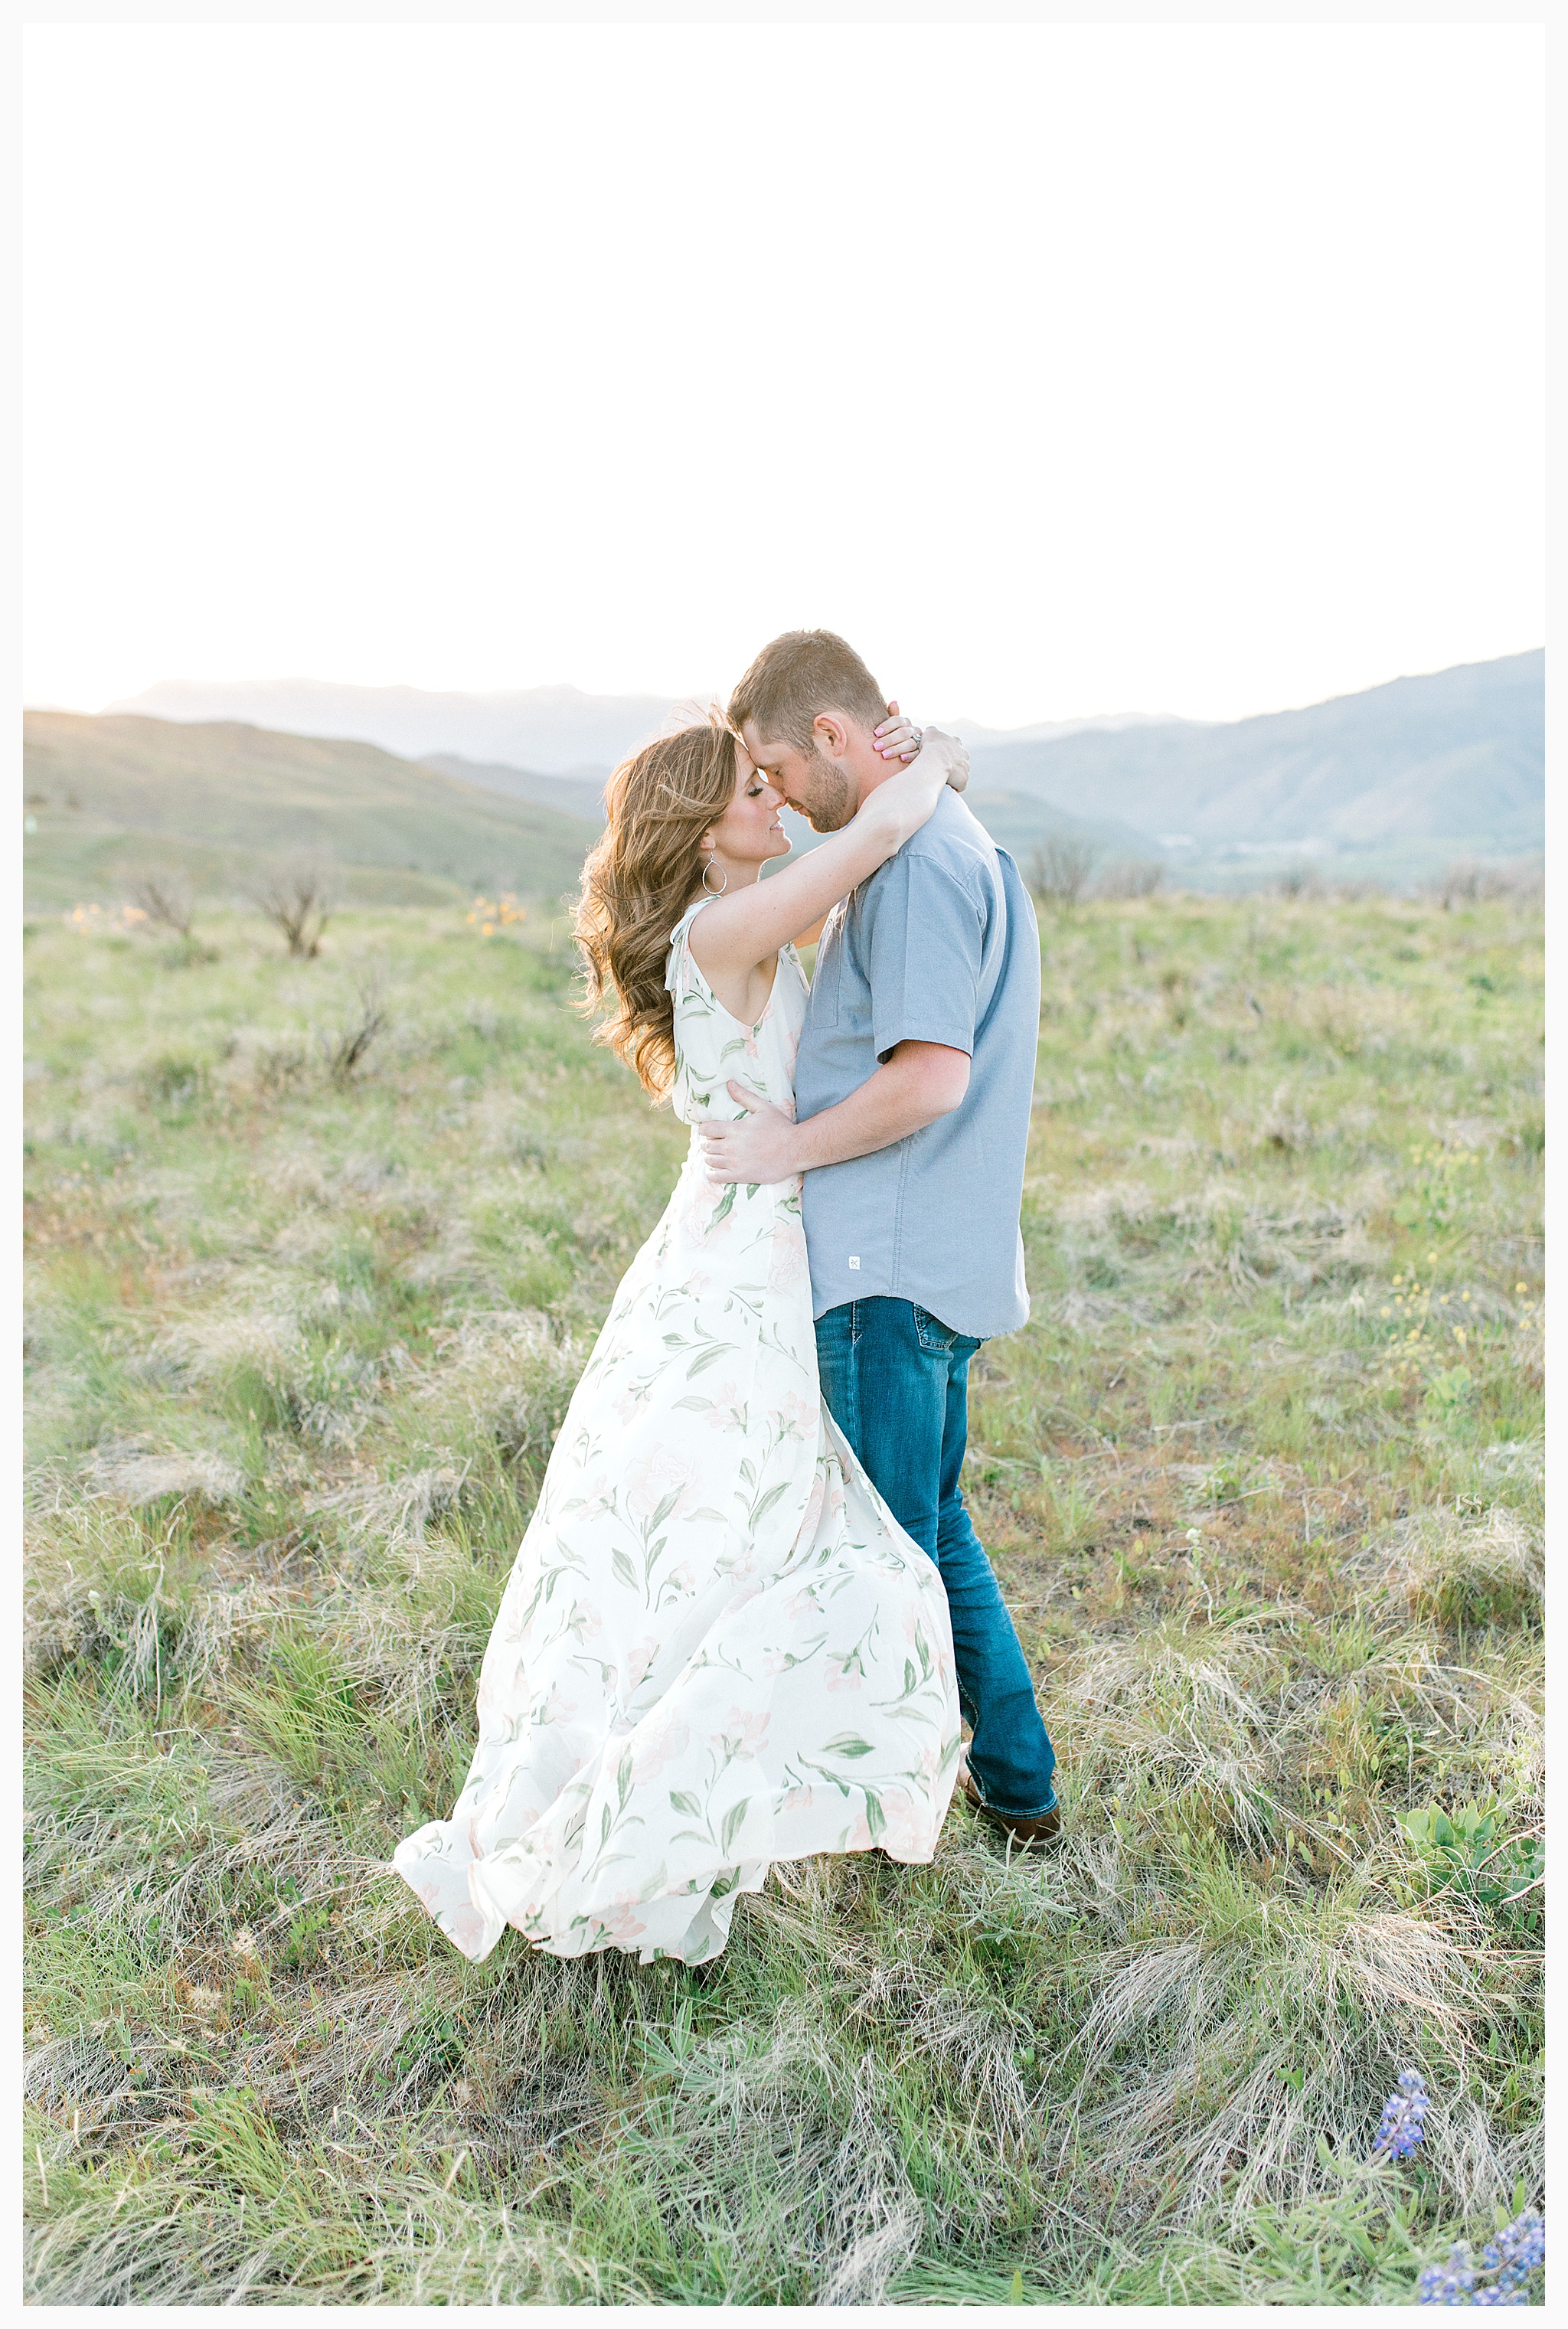 Engagement session amongst the wildflowers in Wenatchee, Washington | Engagement Session Outfit Inspiration for Wedding Photography with Emma Rose Company | Light and Airy PNW Photographer, Seattle Bride_0025.jpg